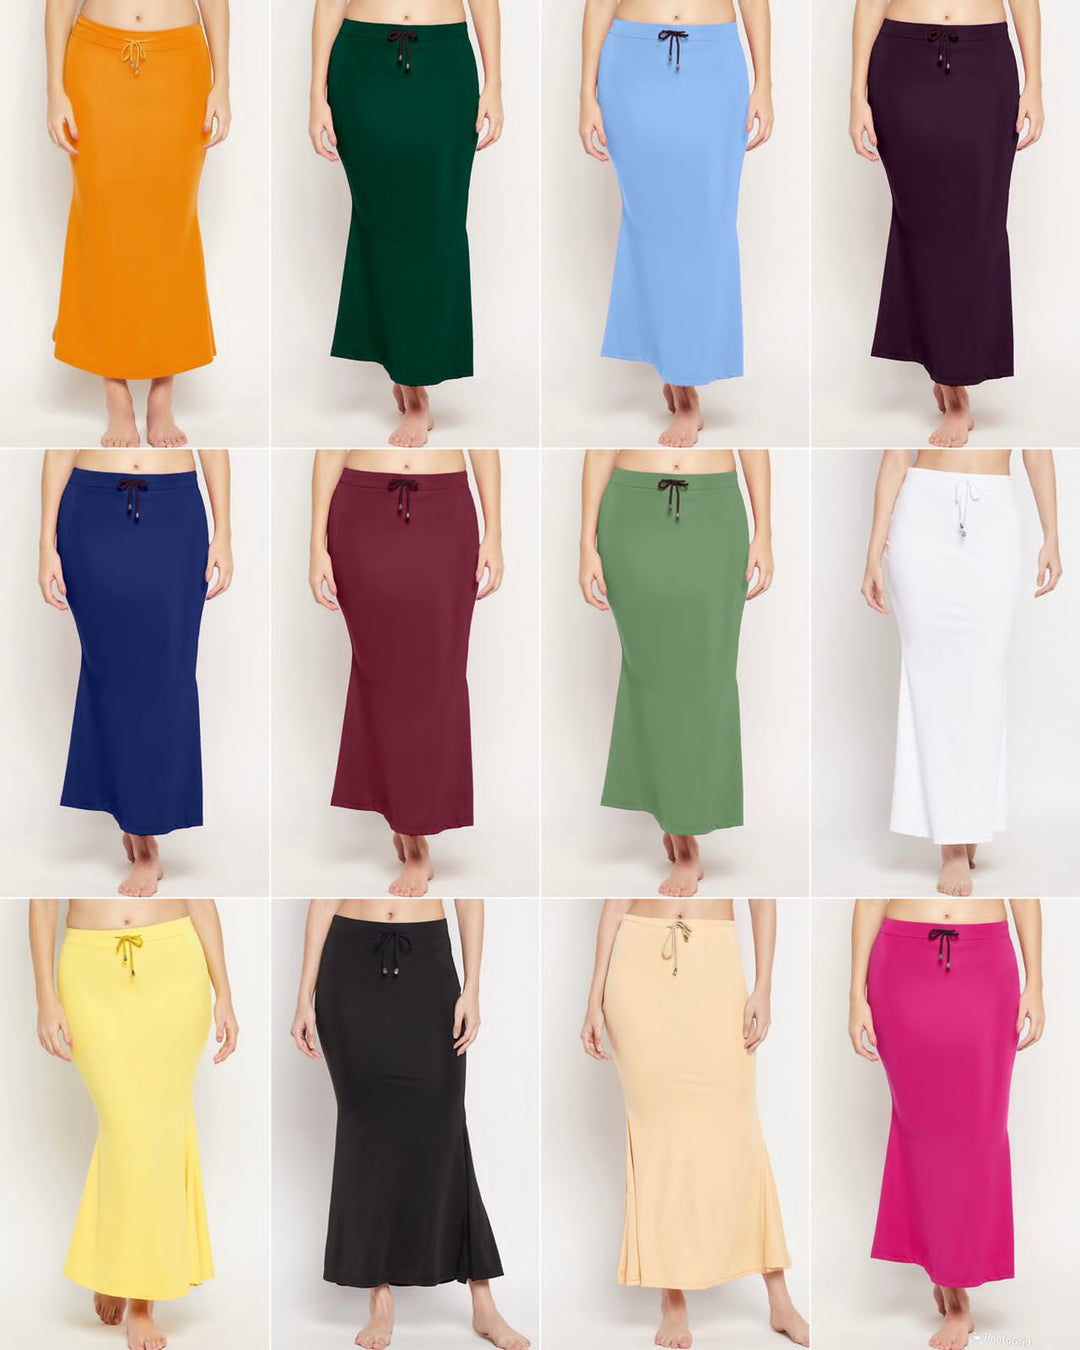 Shapewear Petticoat - available in all colors. Premium quality